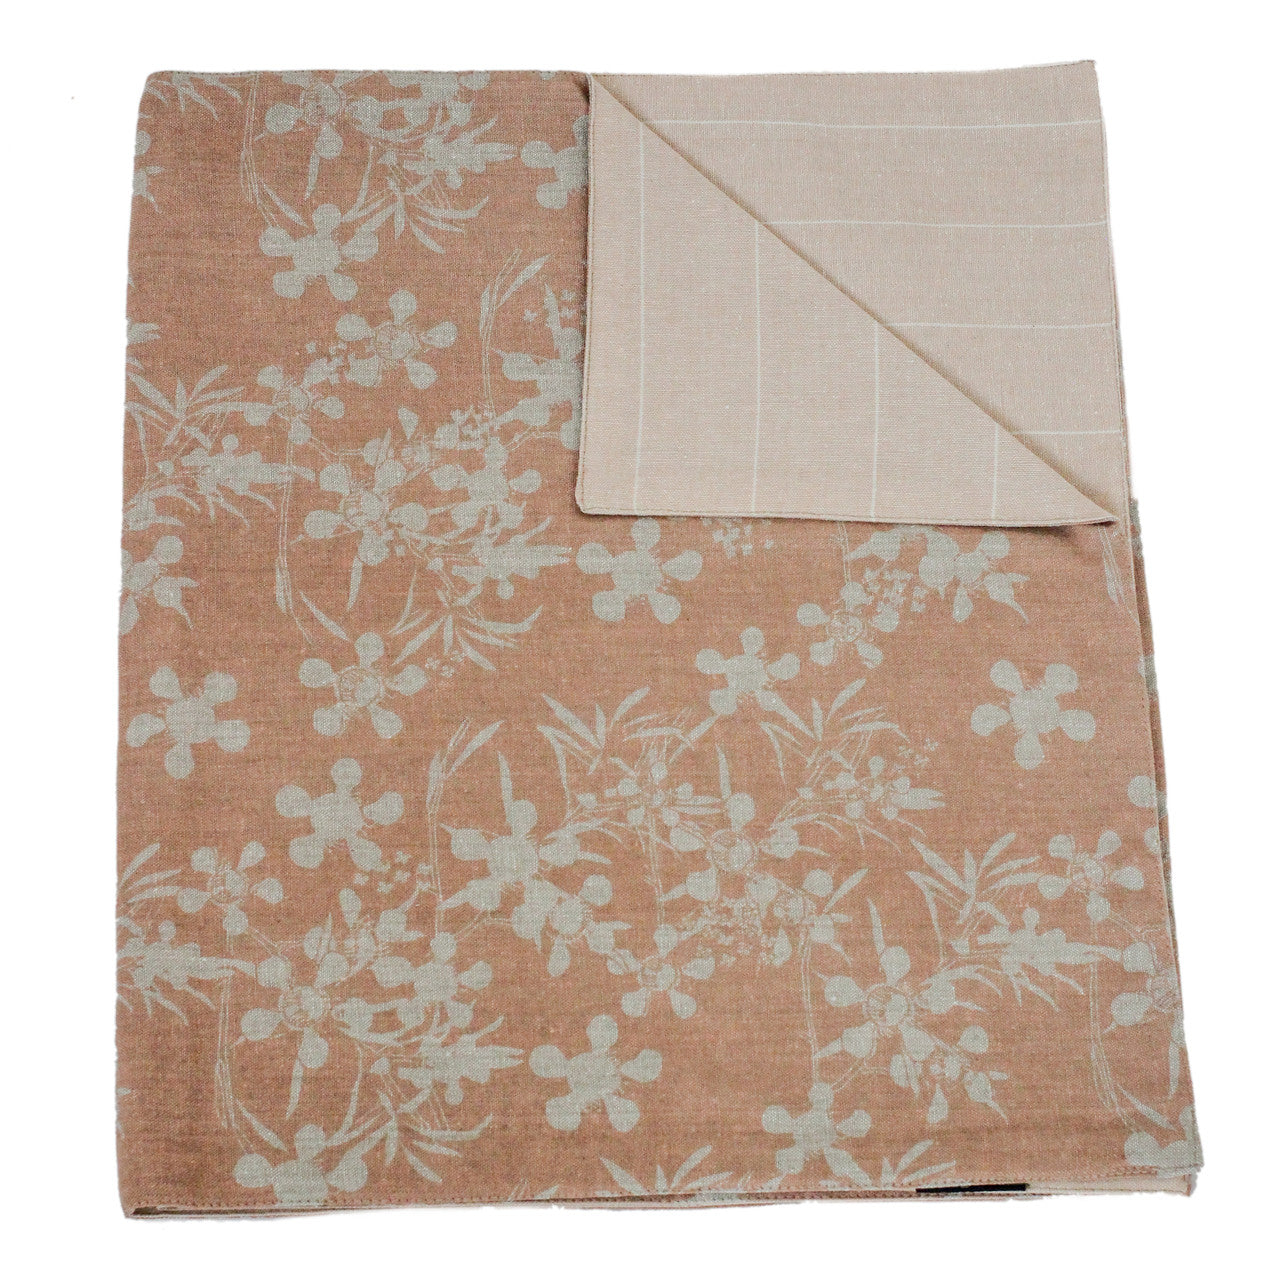 blush terracotta runner with botanical design folded with one corner flapped over showing the reverse side.